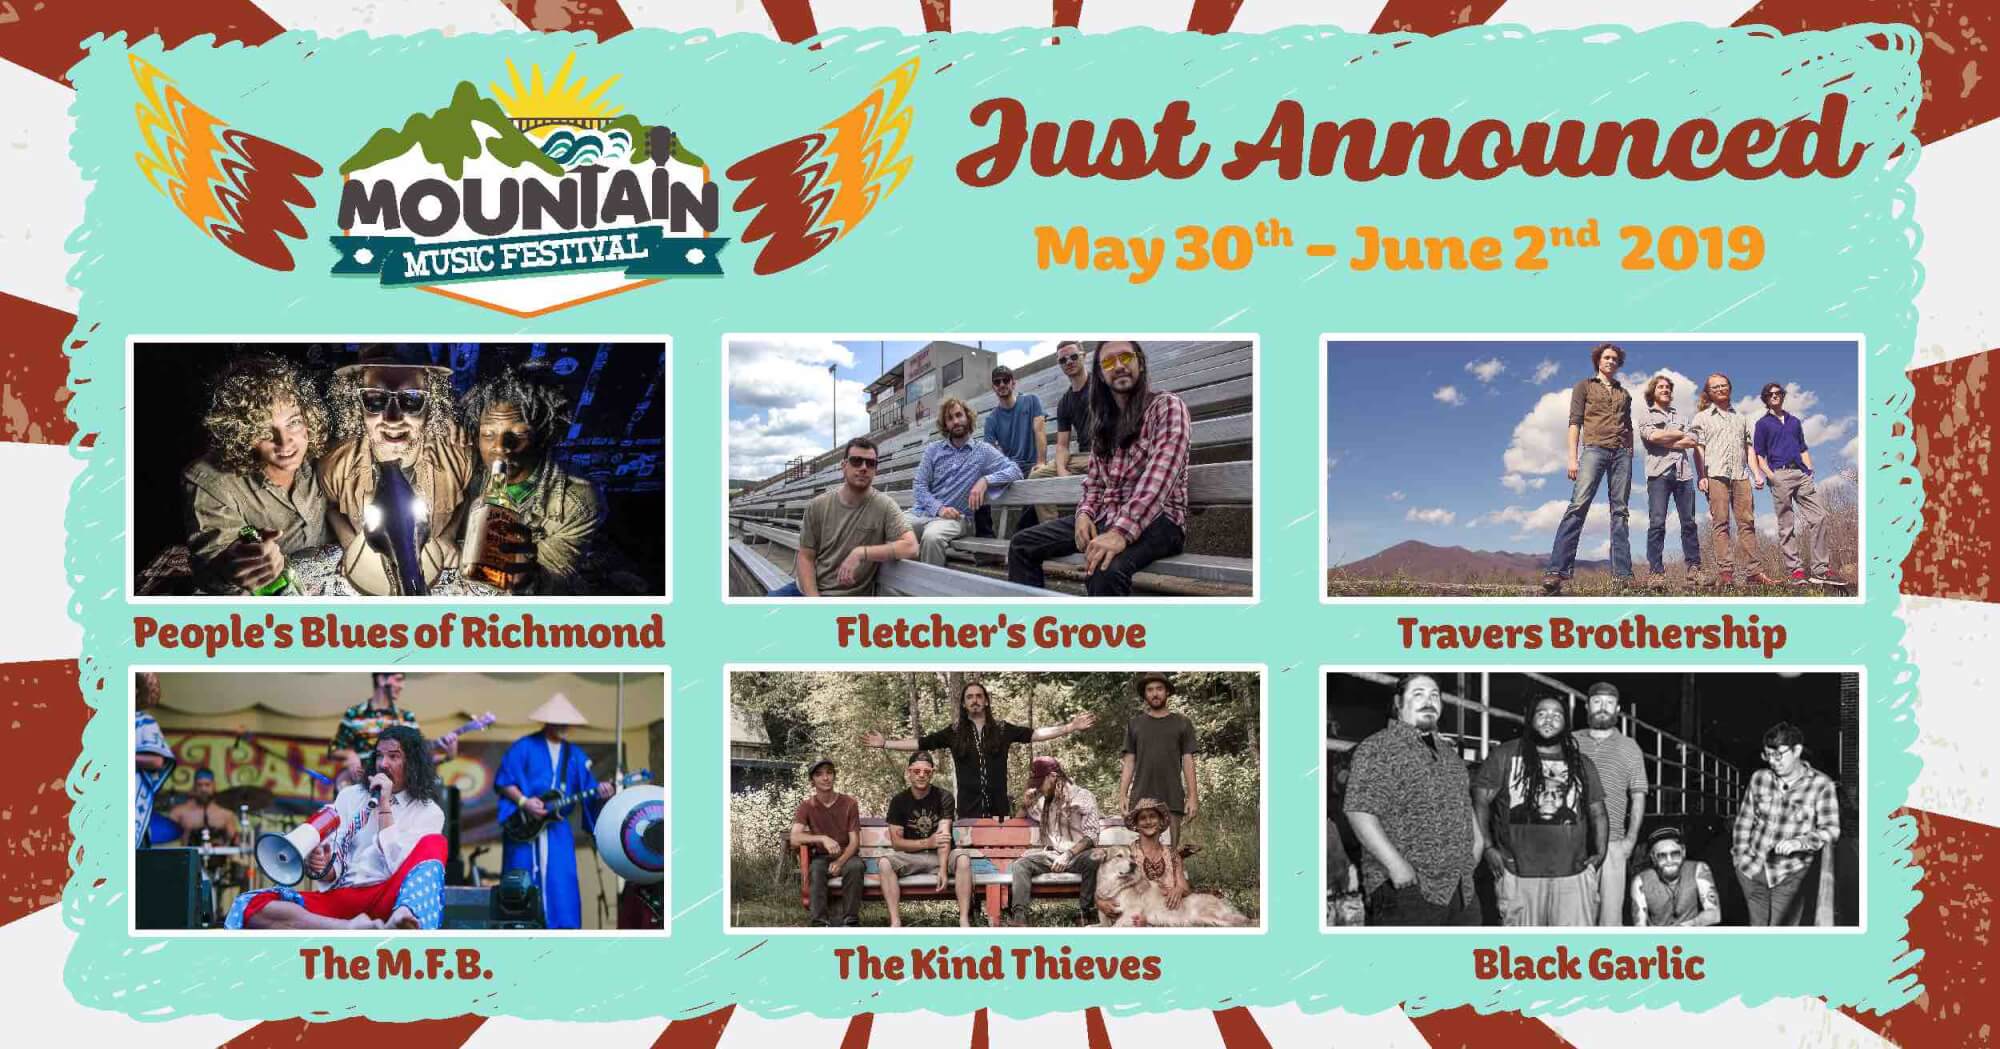 lineup announcement for mountain music festival 2019 at ace adventure resort featuring Peoples blues of richmond fletchers grove travers brothership the mfb the kind thieves and black garlic